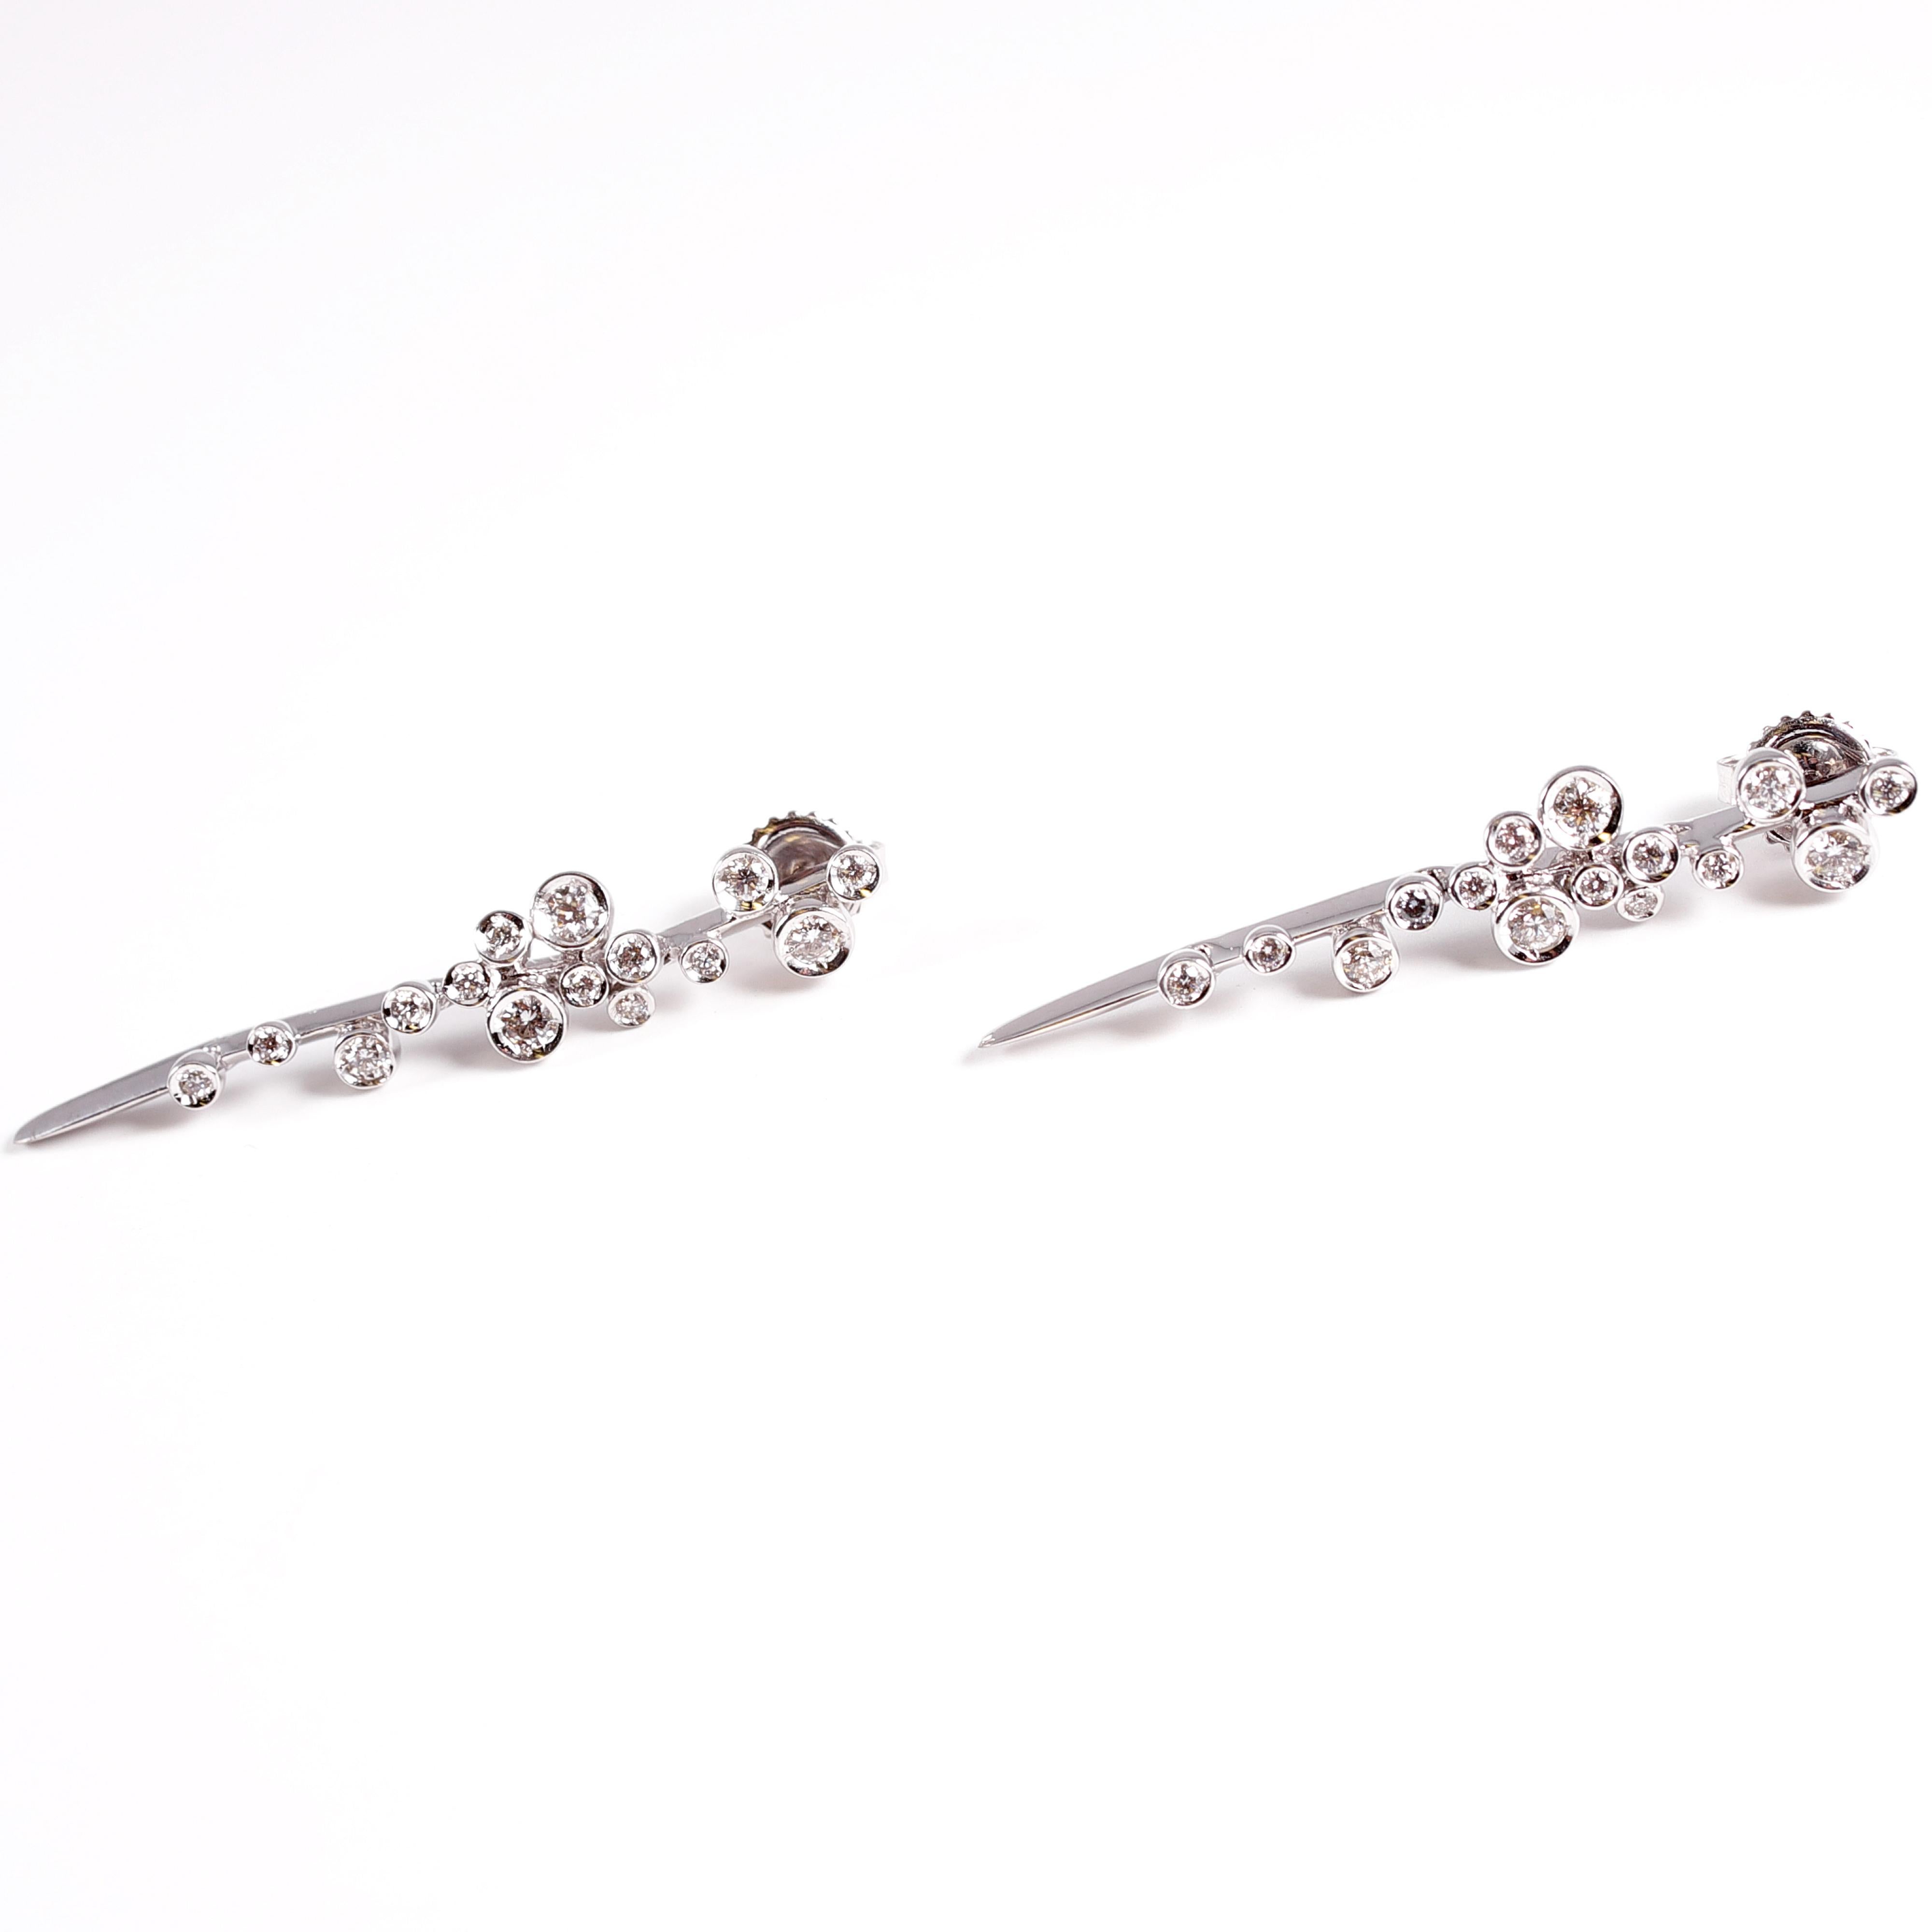 One pair of 18 karat white gold and 0.60 carat diamond earrings by David Morris, from the Astral Collection.  Accented with asymmetrically placed round diamonds on an articulated knife-edge bar.  The diamonds are stated to be F - G in color and VS